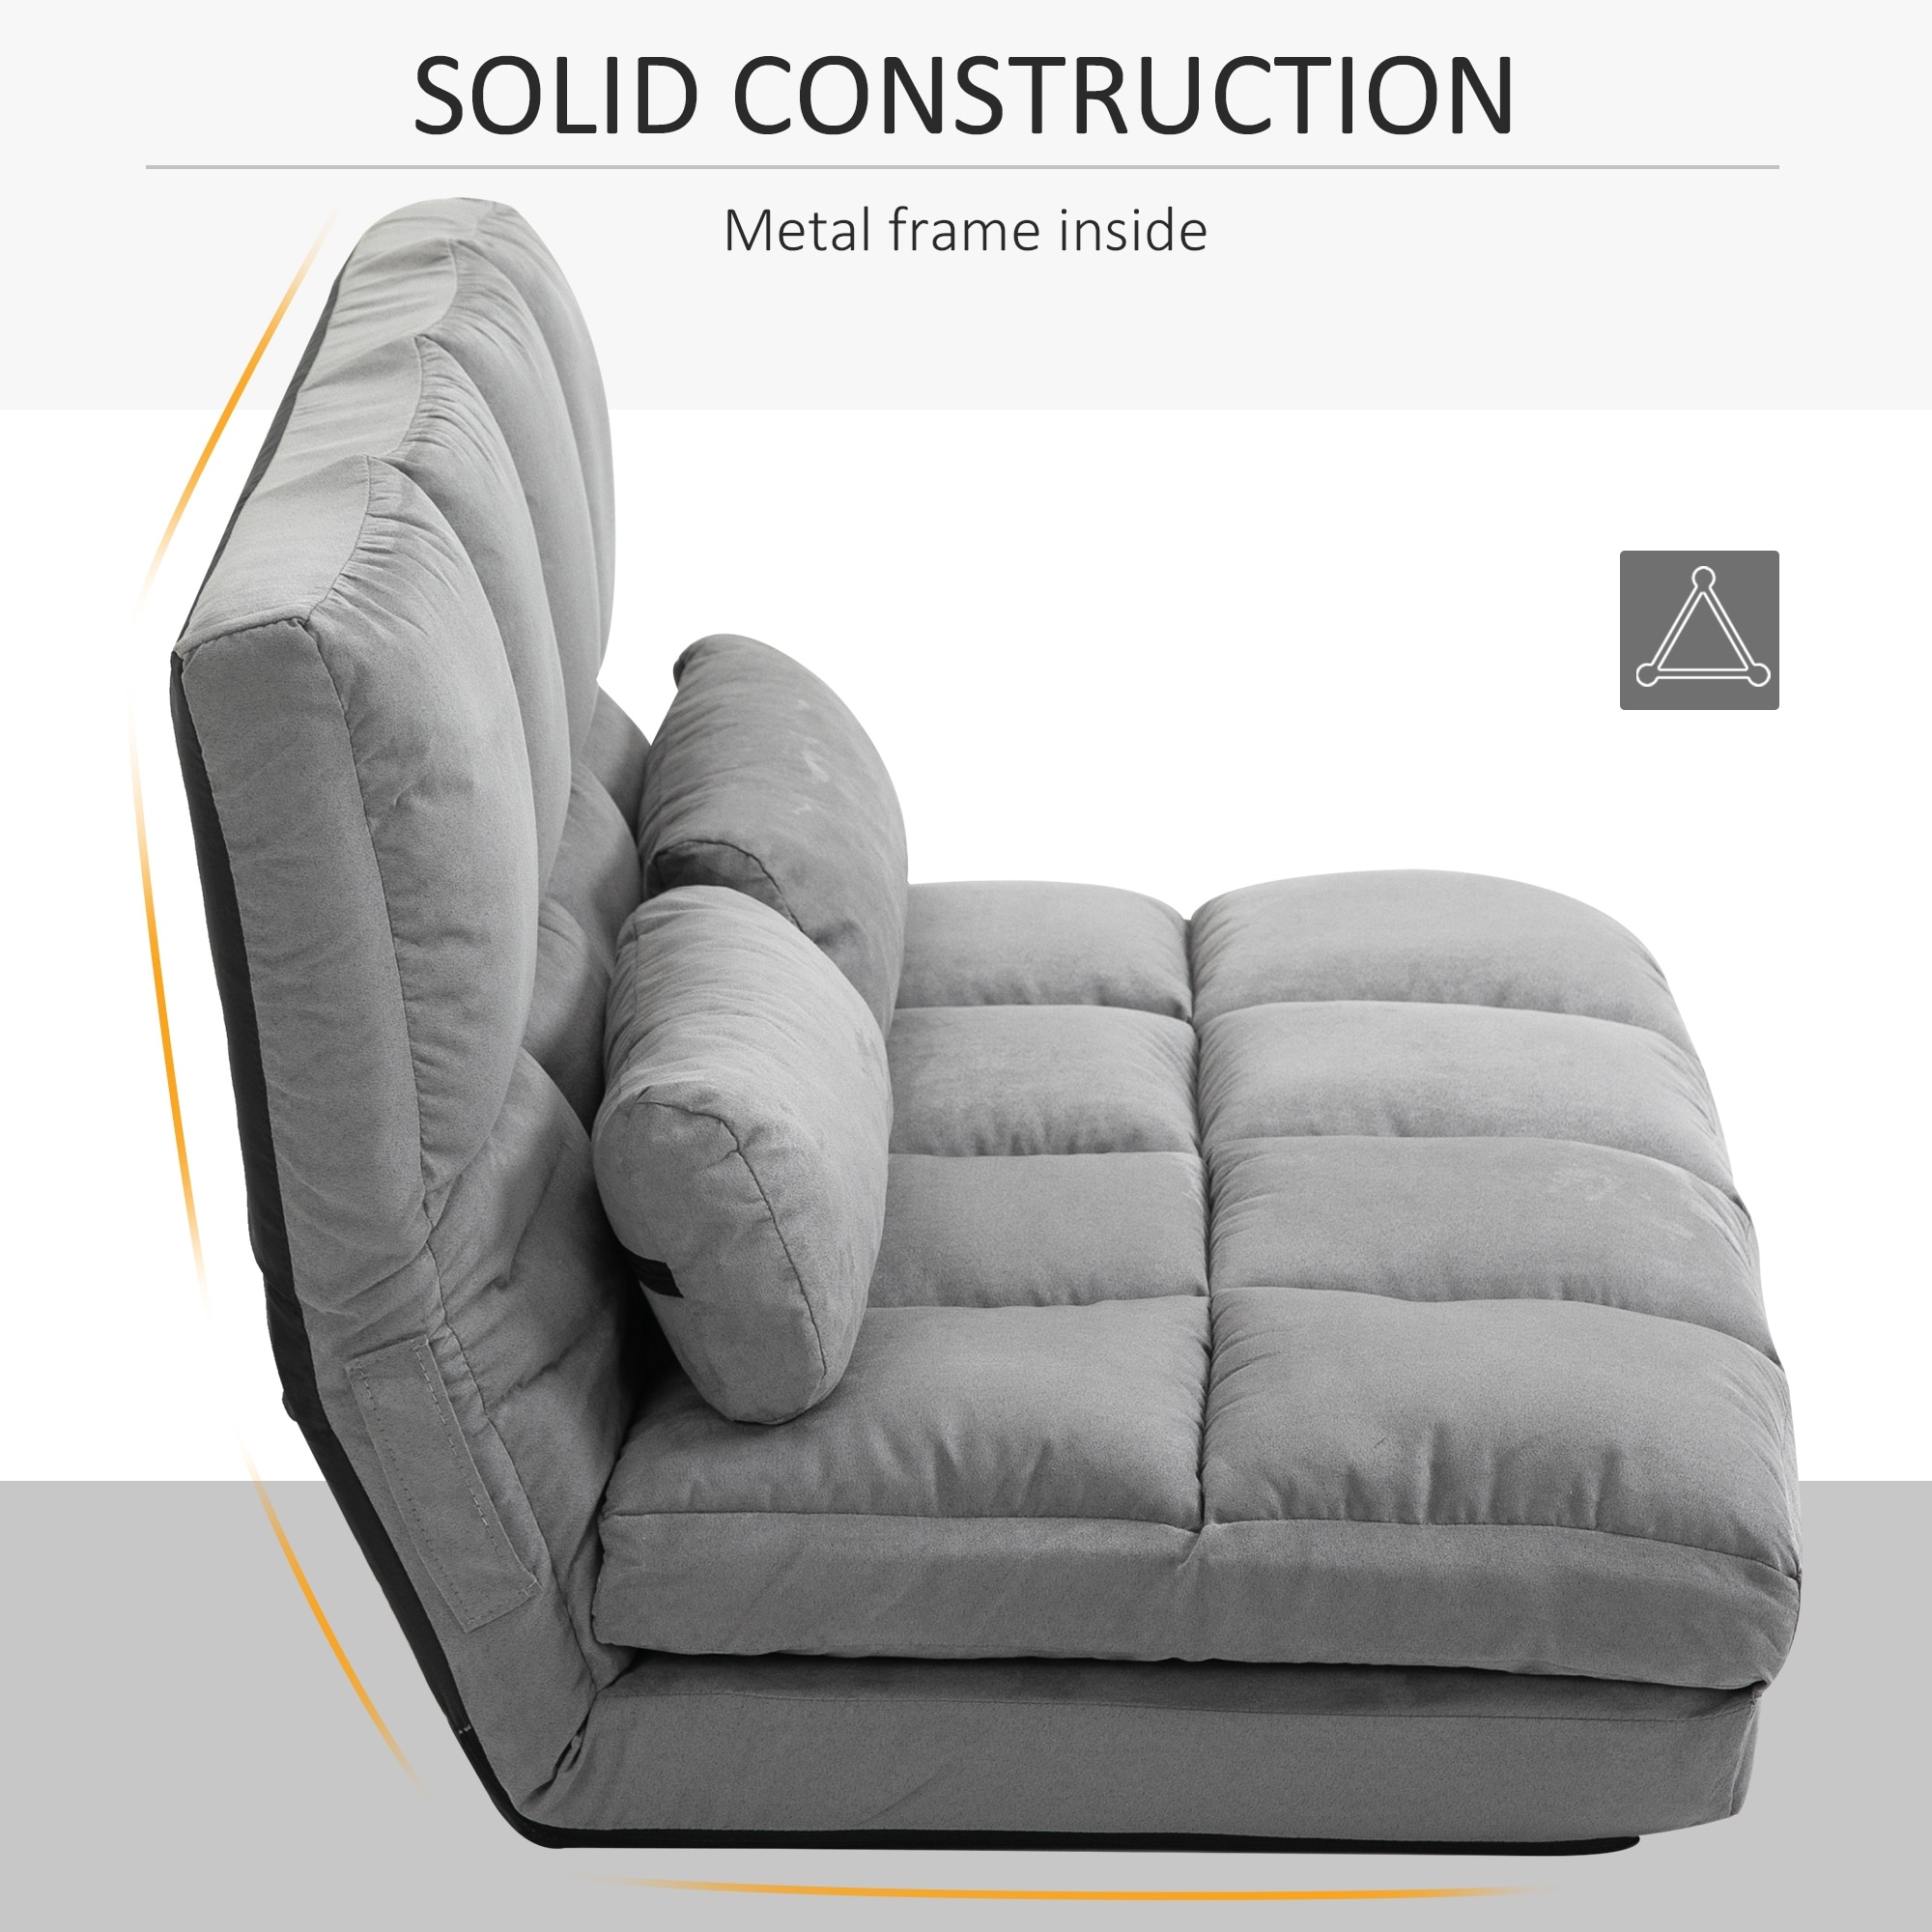 https://ak1.ostkcdn.com/images/products/is/images/direct/682b0dde2c2157415291bd601ffd7b76acfb2774/HOMCOM-Convertible-Floor-Sofa-with-7-Position-Adjustable-Backrest%2C-Thick-Padding%2C-Metal-Frame-and-2-Pillows.jpg